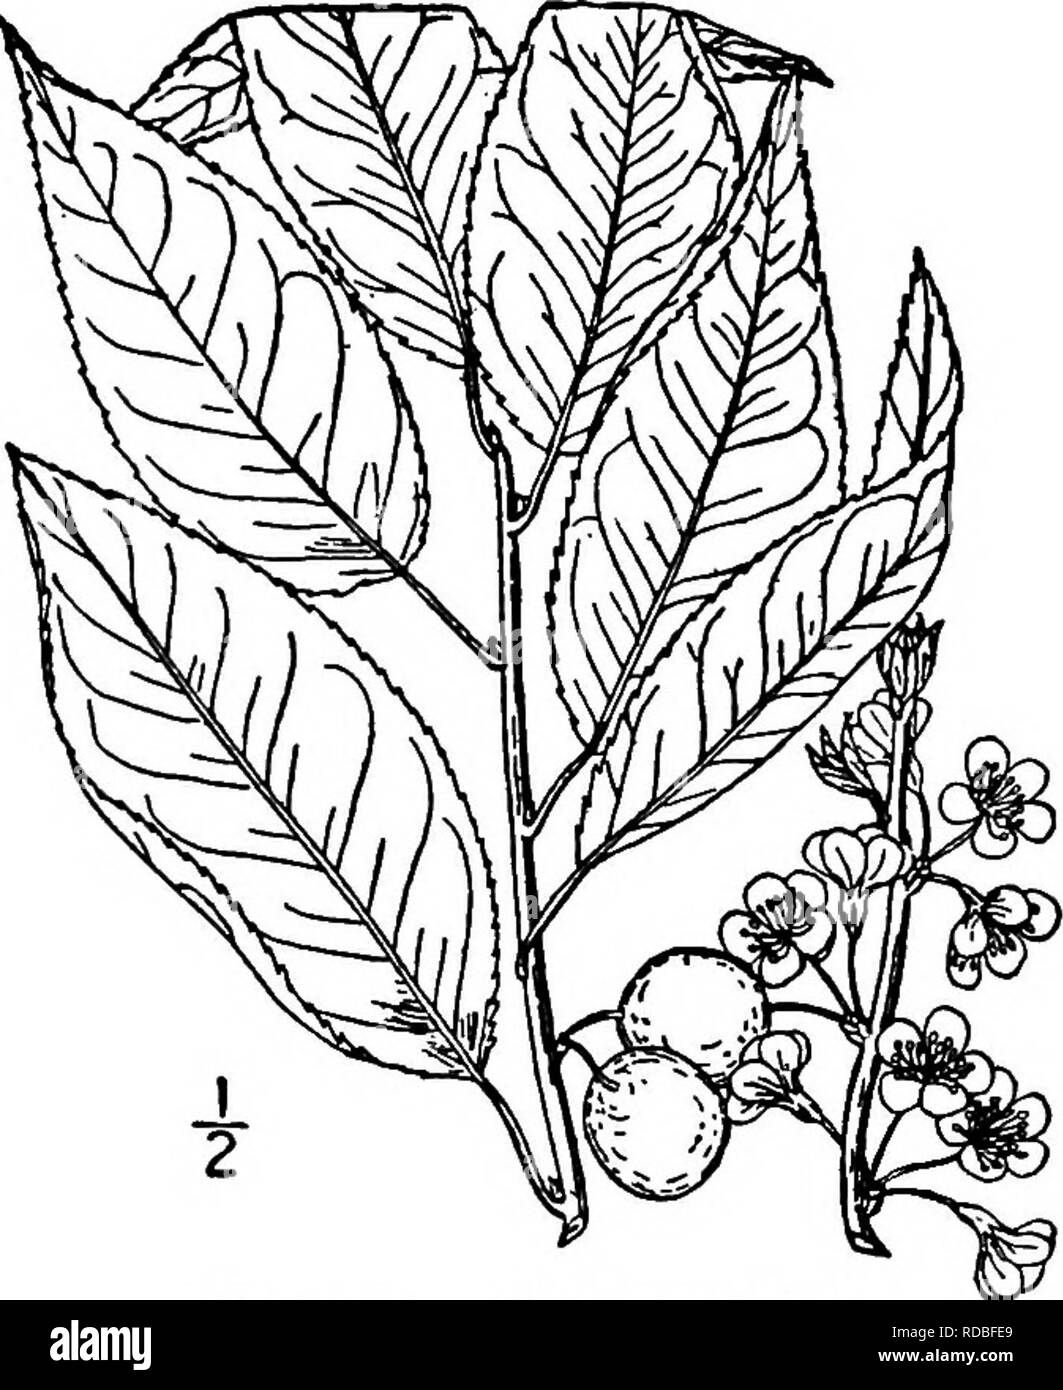 . North American trees : being descriptions and illustrations of the trees growing independently of cultivation in North America, north of Mexico and the West Indies . Trees. 490 The Plums and Cherries are unfolding, are about 1.5 cm. across, in nearly stalkless, 2- to s-flowered umbels, on slender, smooth pedicels about 2 cm. long; the calyx-tube is narrowly obconic, its lobes broadly oblong, blunt, and hairy within; the petals are rounded, white, fad- ing to pink; the filaments and pistil are smooth. The fruit, ripening in July or August, is globose-ovoid, i to 2 cm. in di- ameter, dark purp Stock Photo